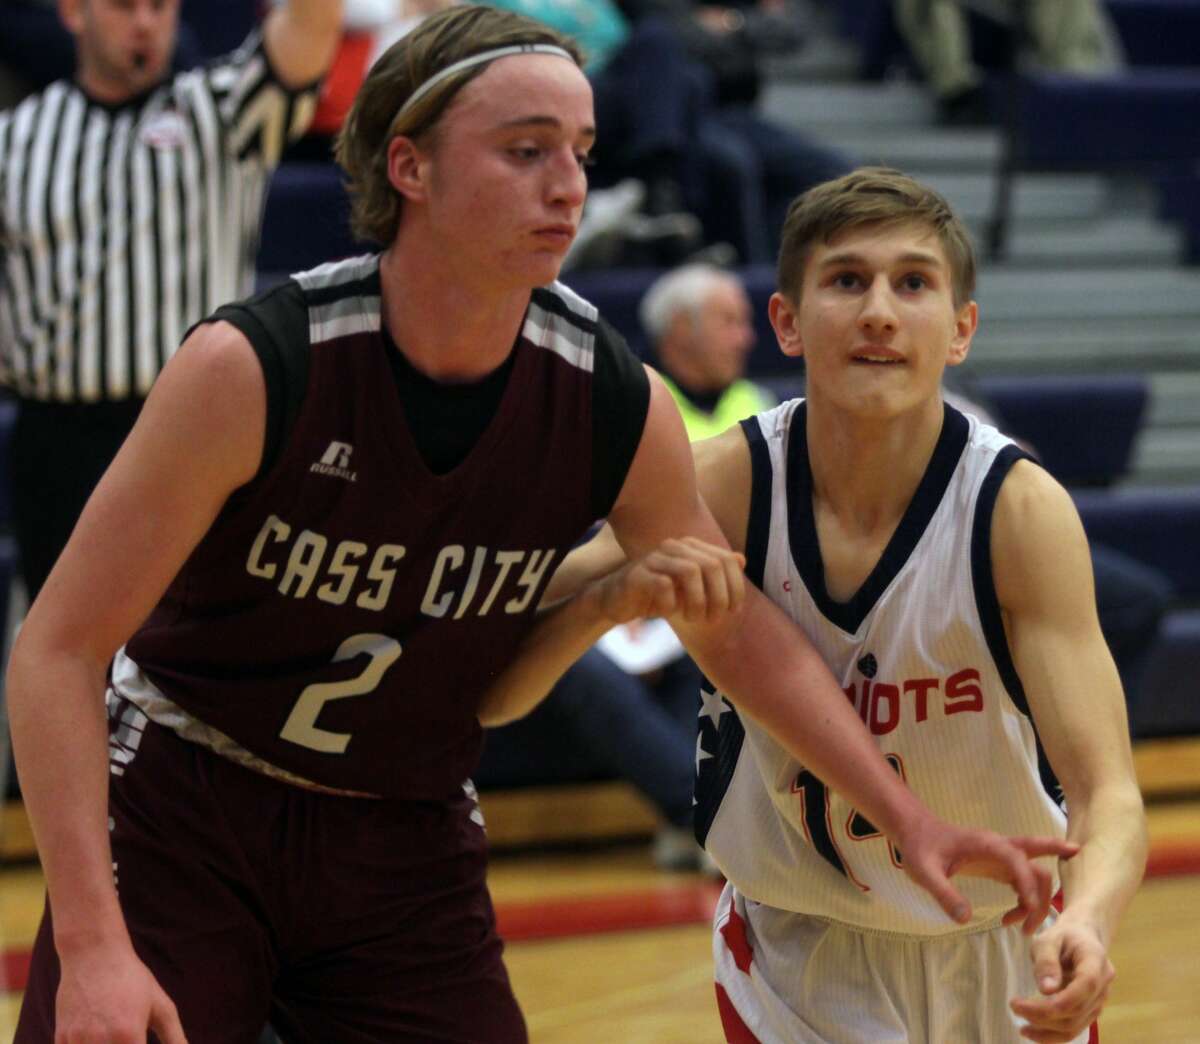 The USA boys basketball team defended home court against Cass City by a margin of 66-40 on Wednesday, Feb. 12.